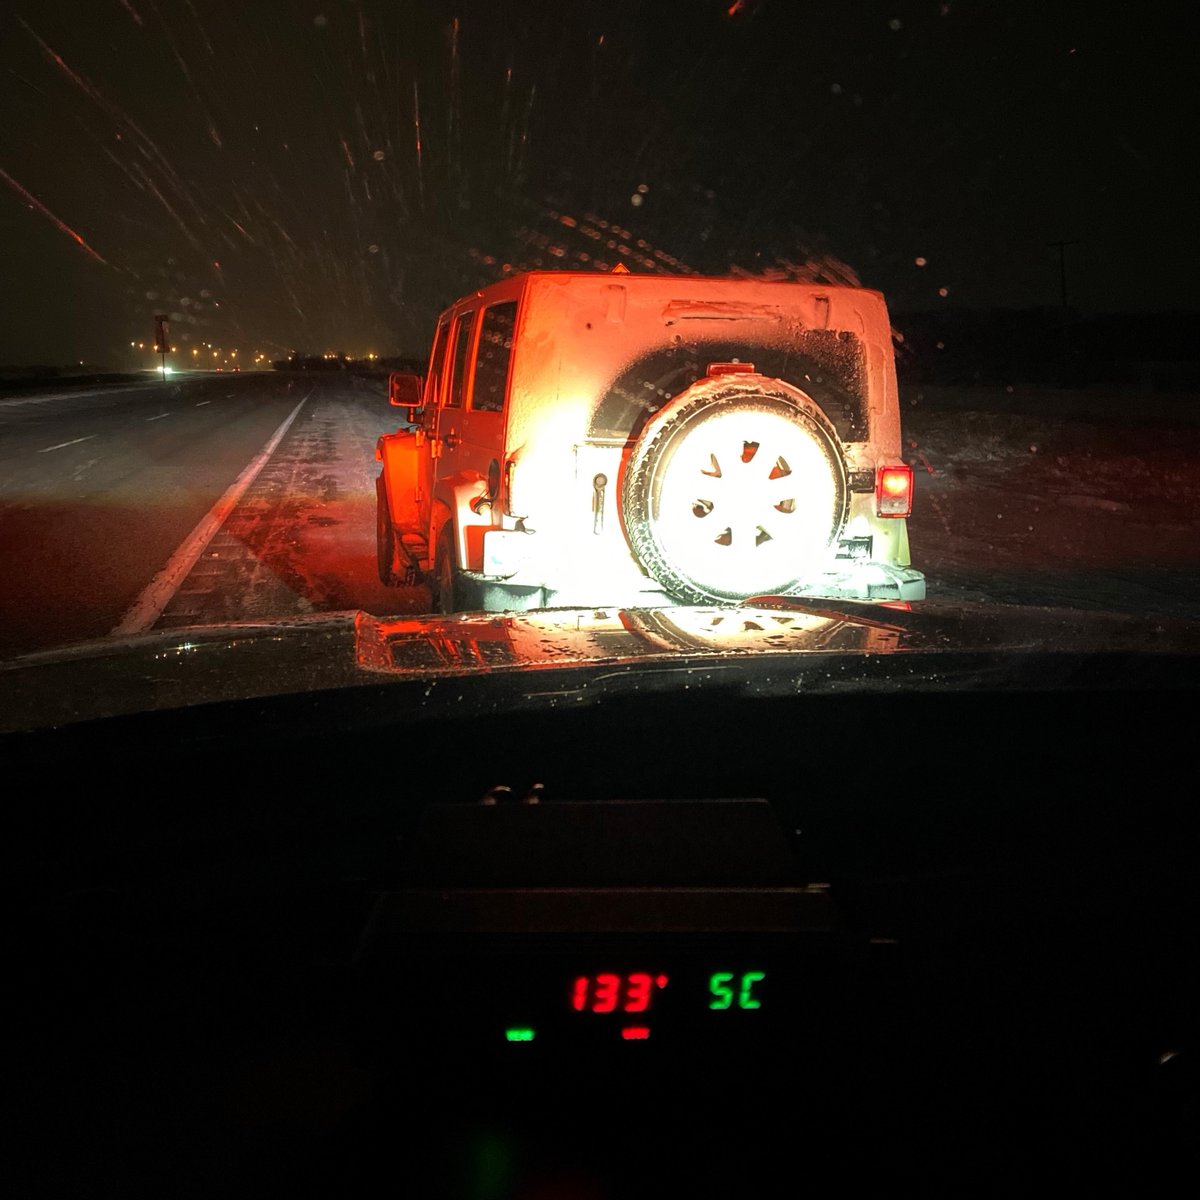 During Friday’s snow storm, when most vehicles on the Perimeter were going less than 90 km/h, this vehicle blew by #rcmpmb doing 133 km/h. 40yo driver had expired driver’s licence. $482 for speeding + $298 for expired DL + Serious Offence Notice. #noexcuses #TrafficTues